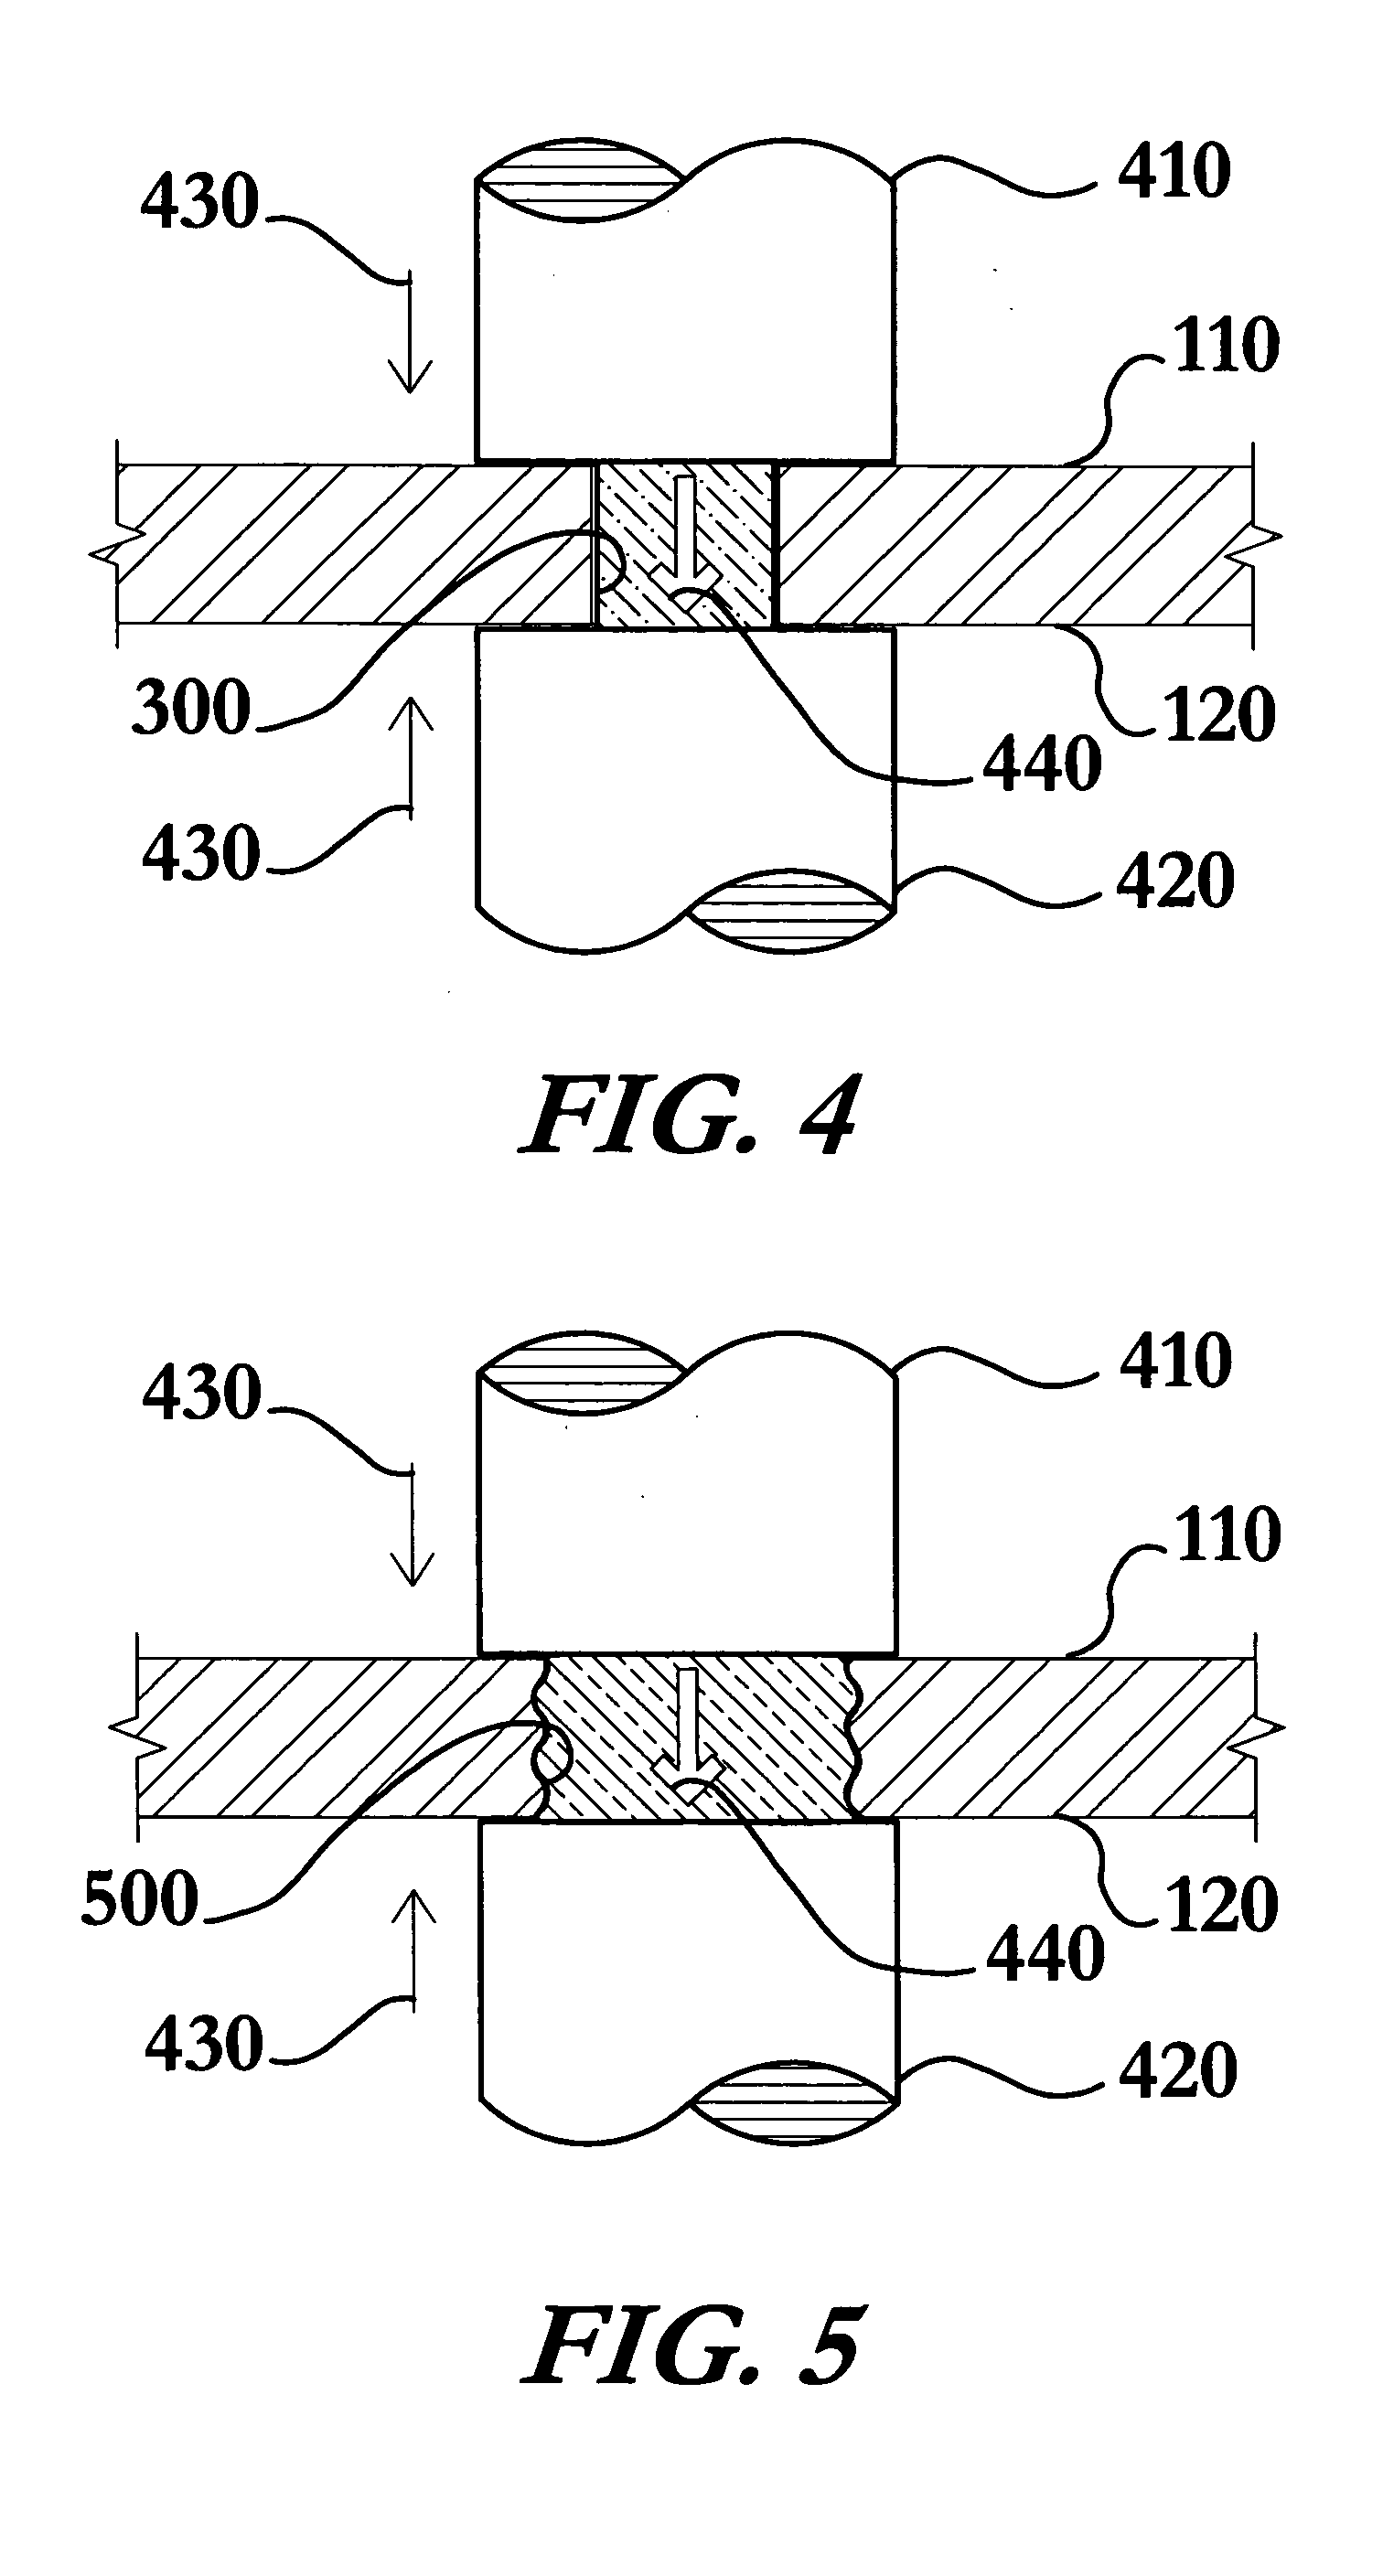 Method for repairing defects in a metallic substrate using welding